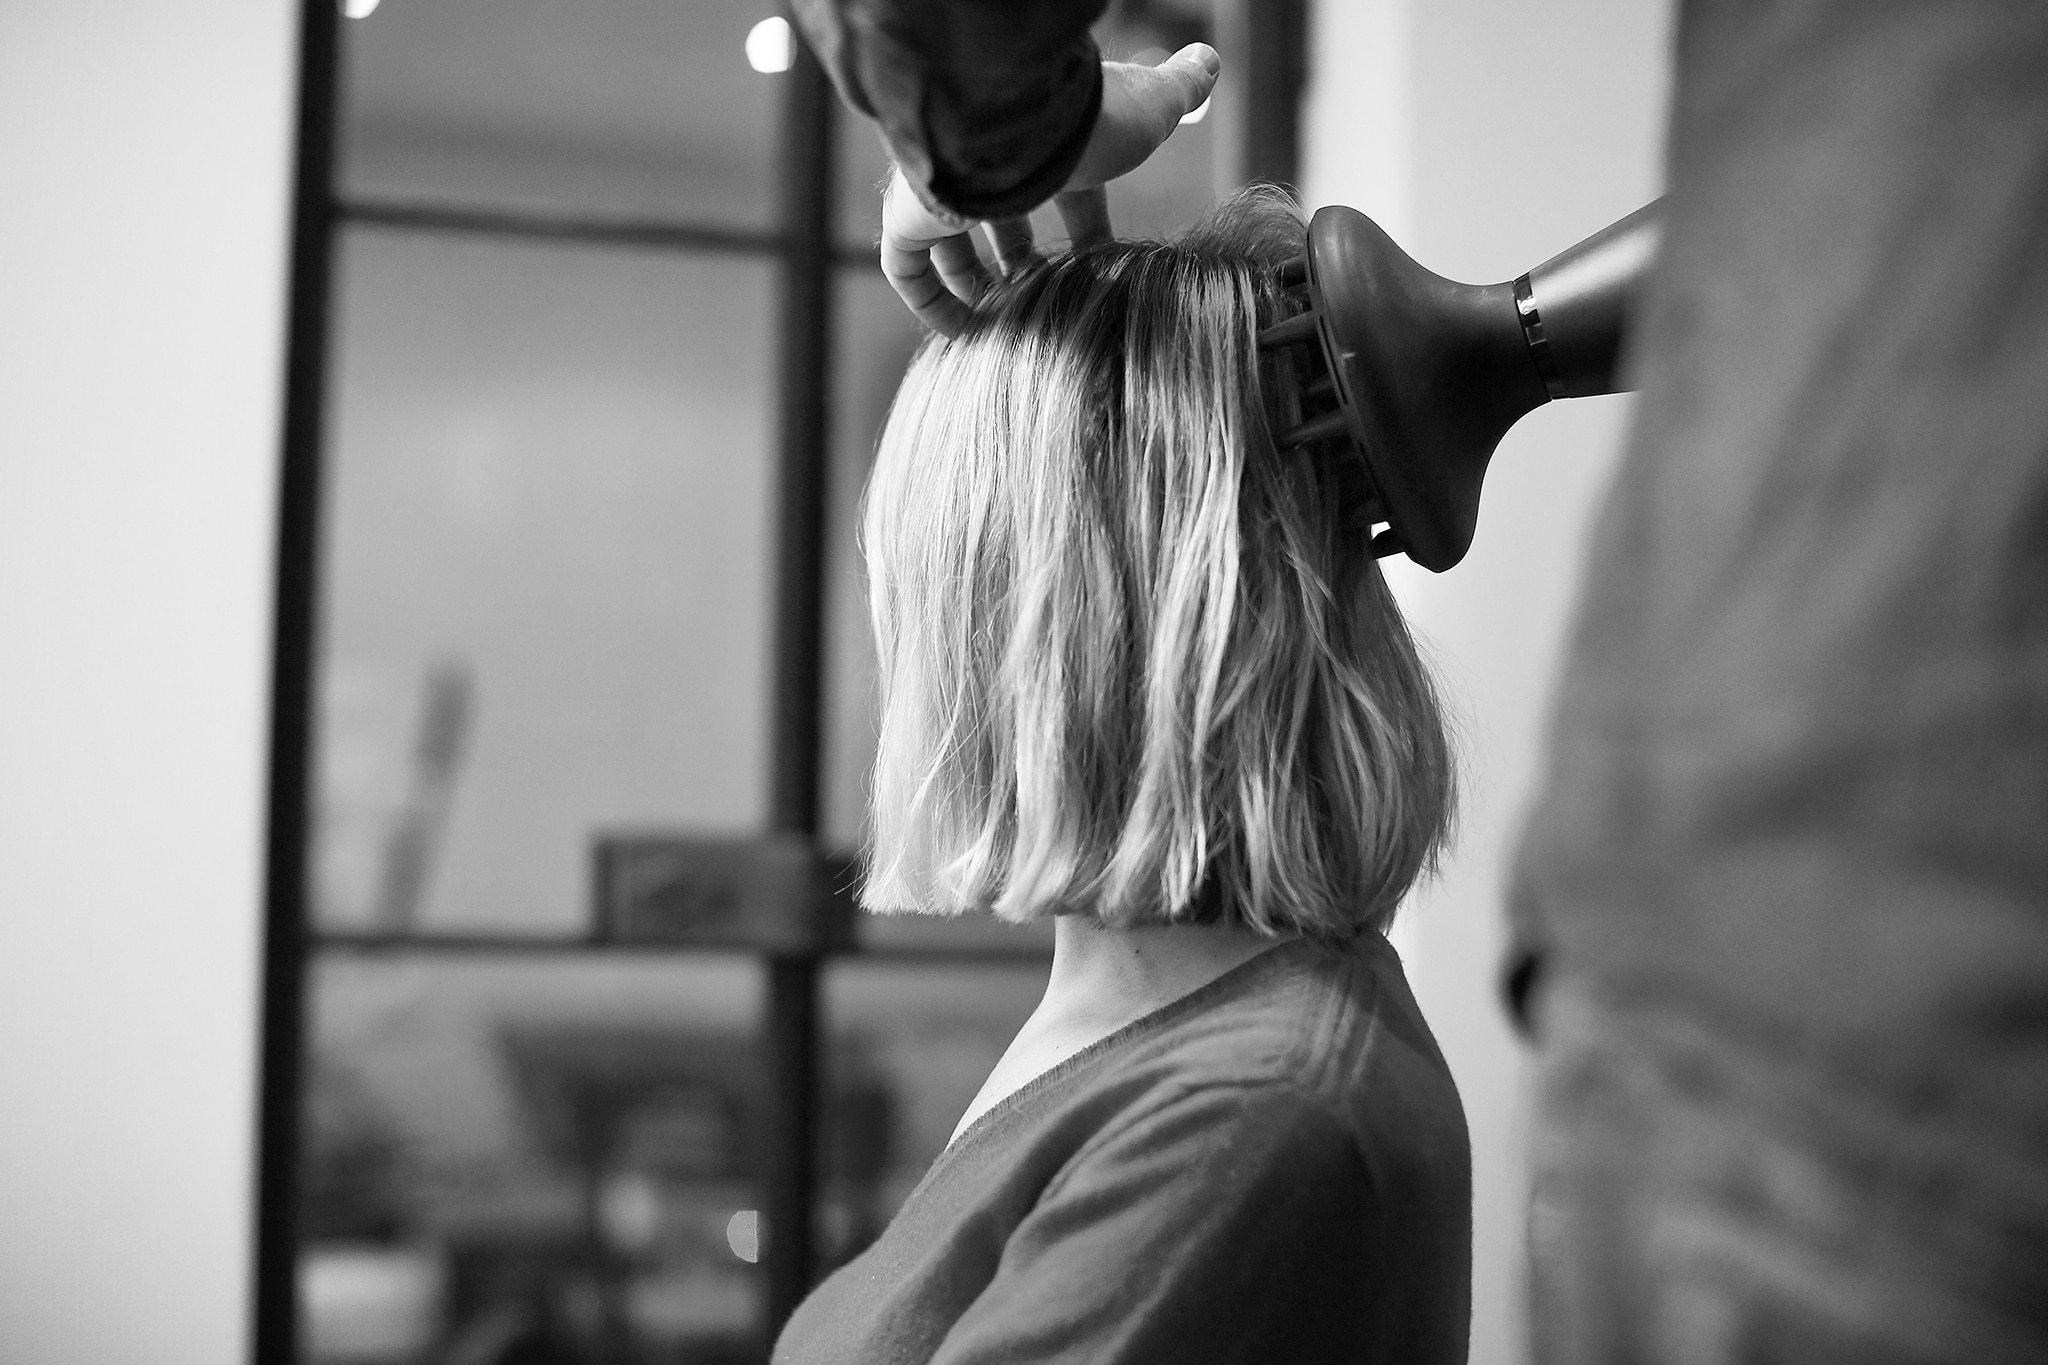 Designer Misha Nonoo with her hair being styled by a hairdresser with a diffuser  